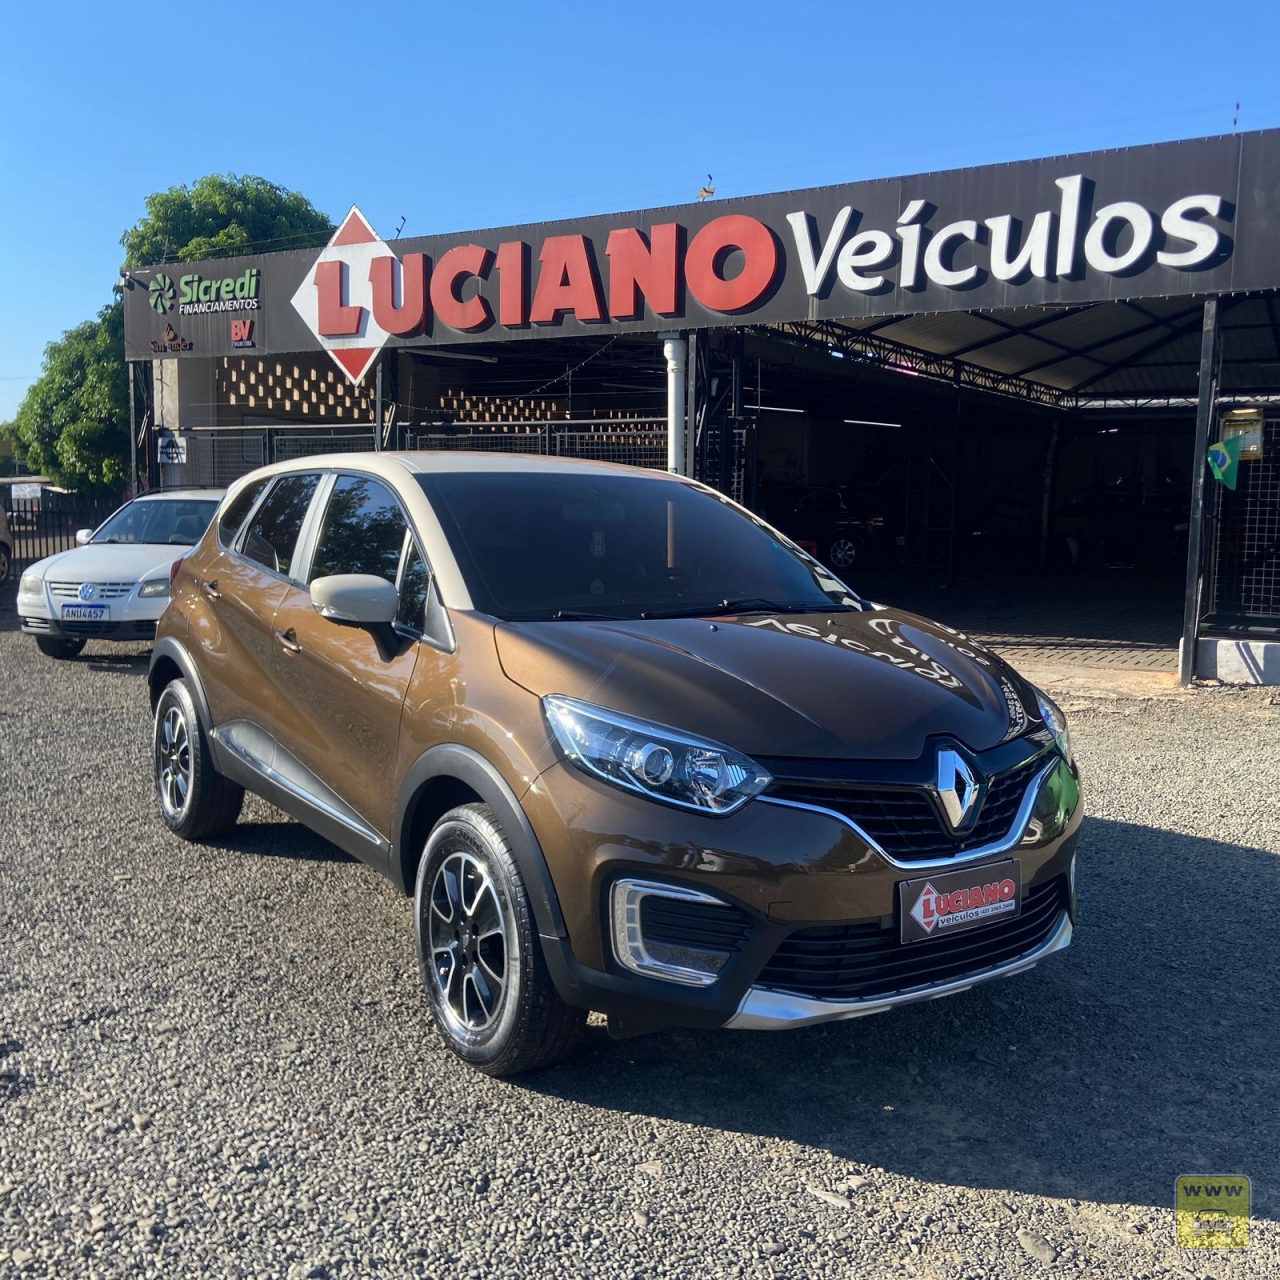 RENAULT CAPTUR LIFE 1.6 A Luciano Veiculos!